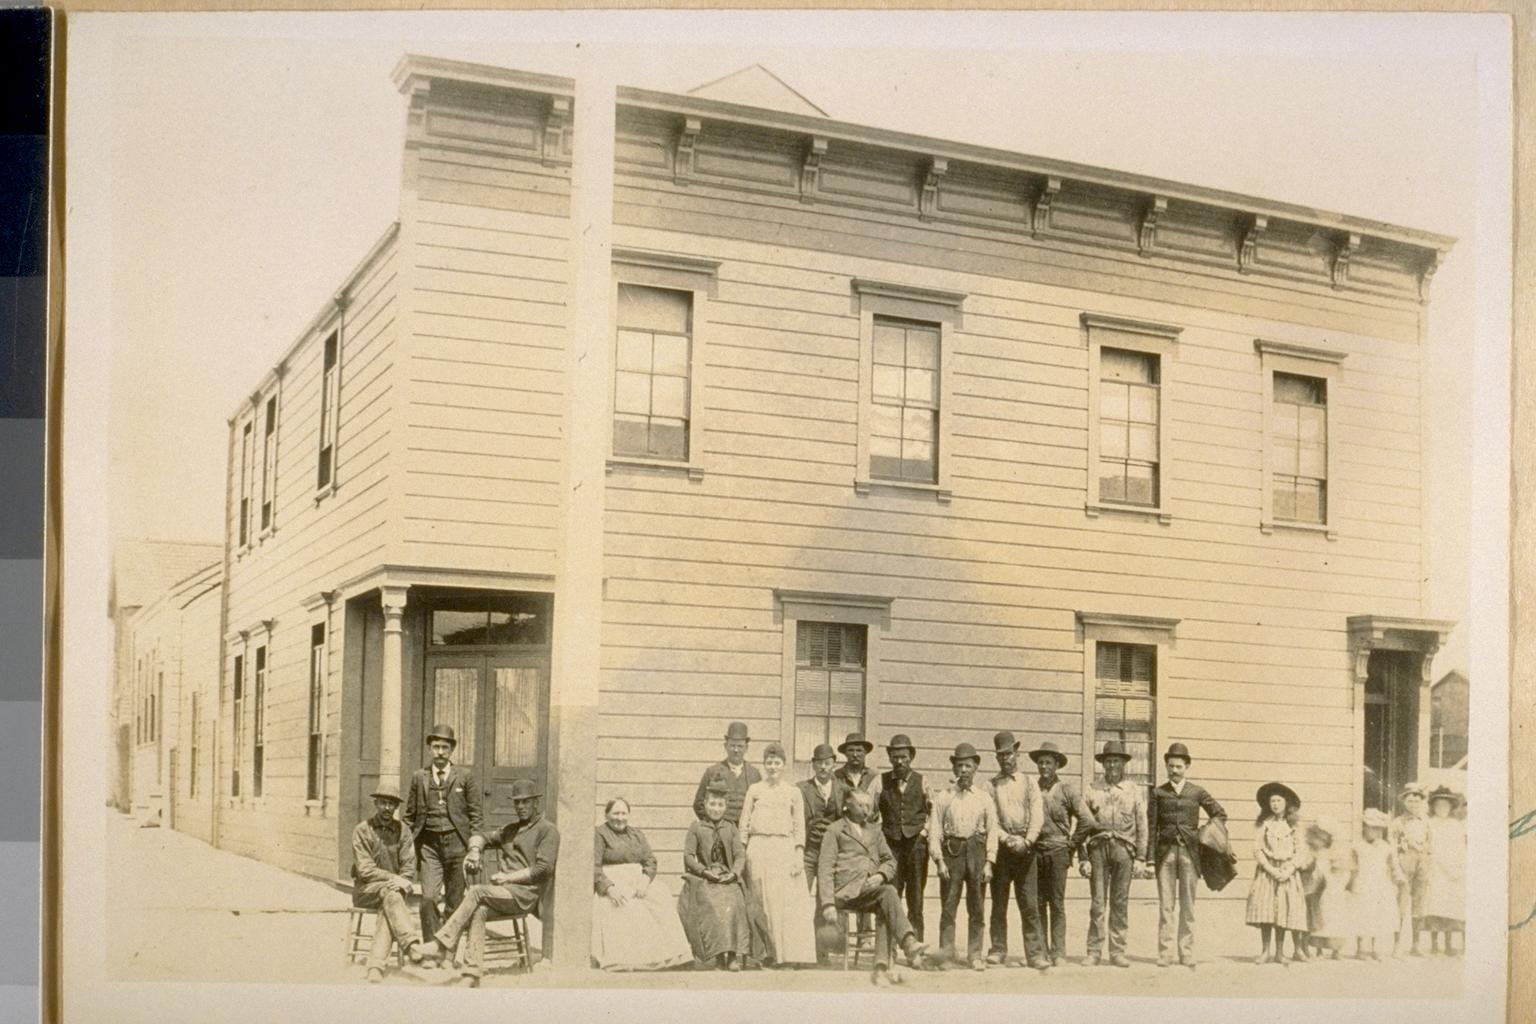 Hotel building with people in front